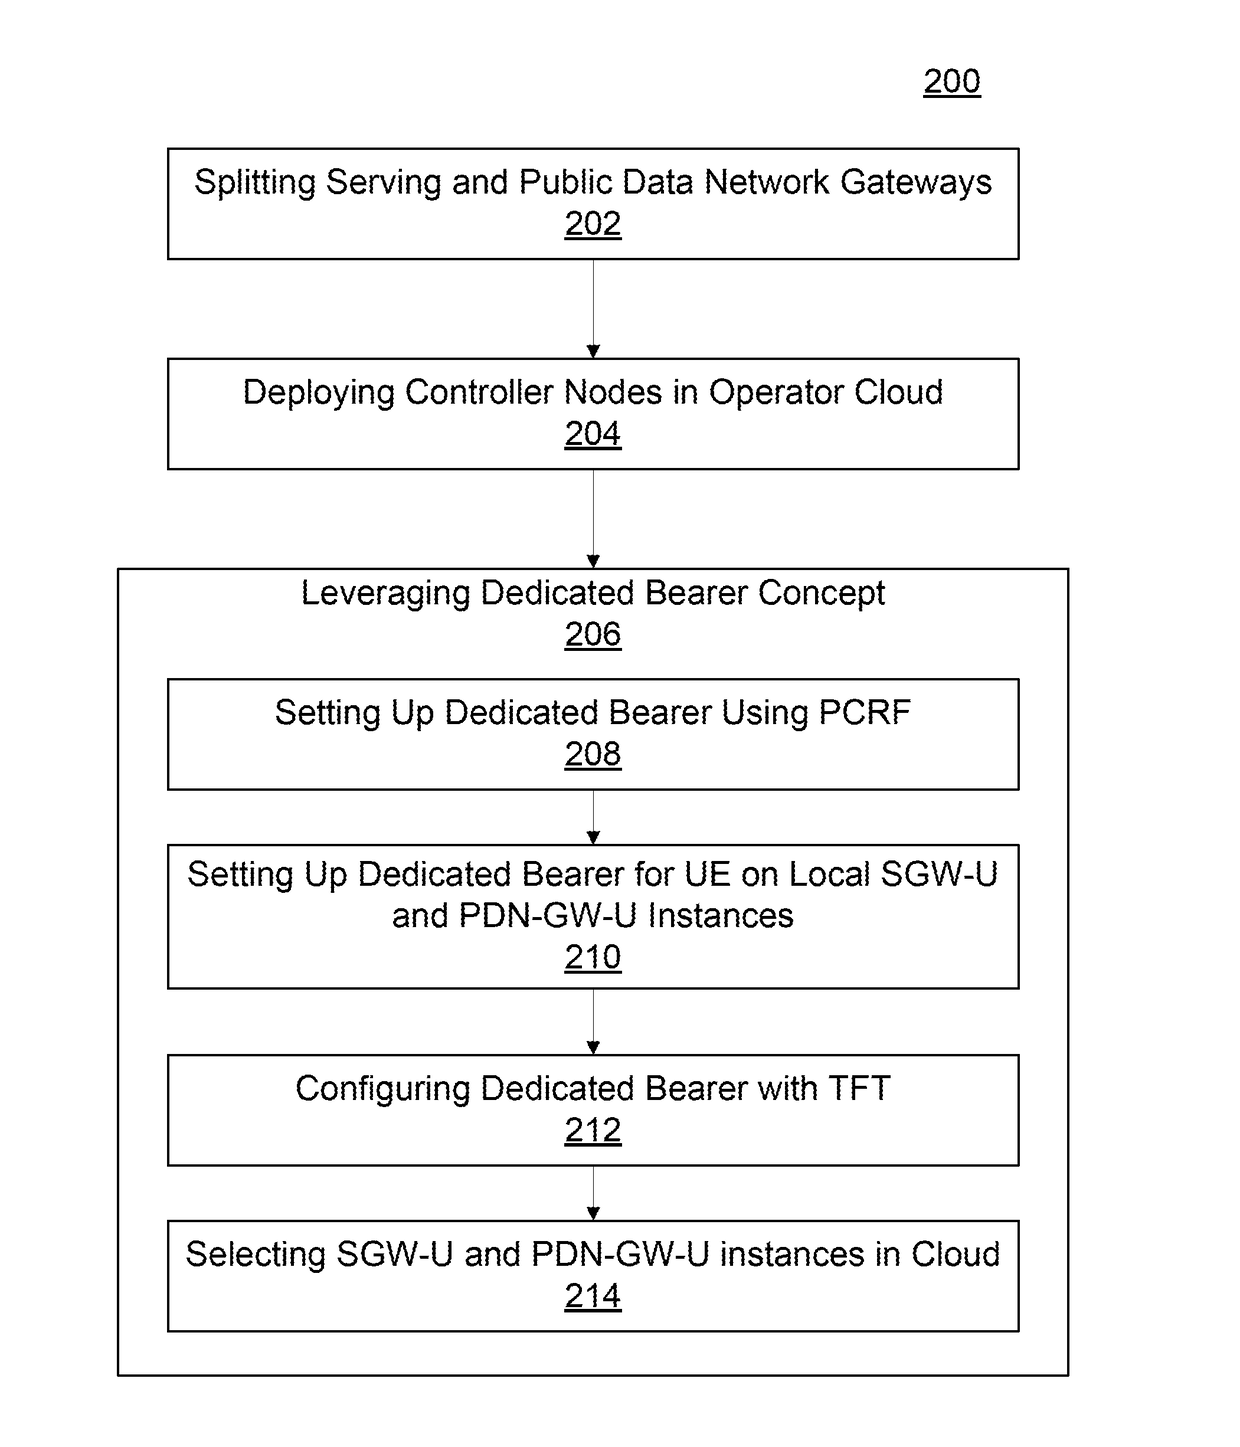 Enabling high-bandwidth, responsive mobile applications in LTE networks